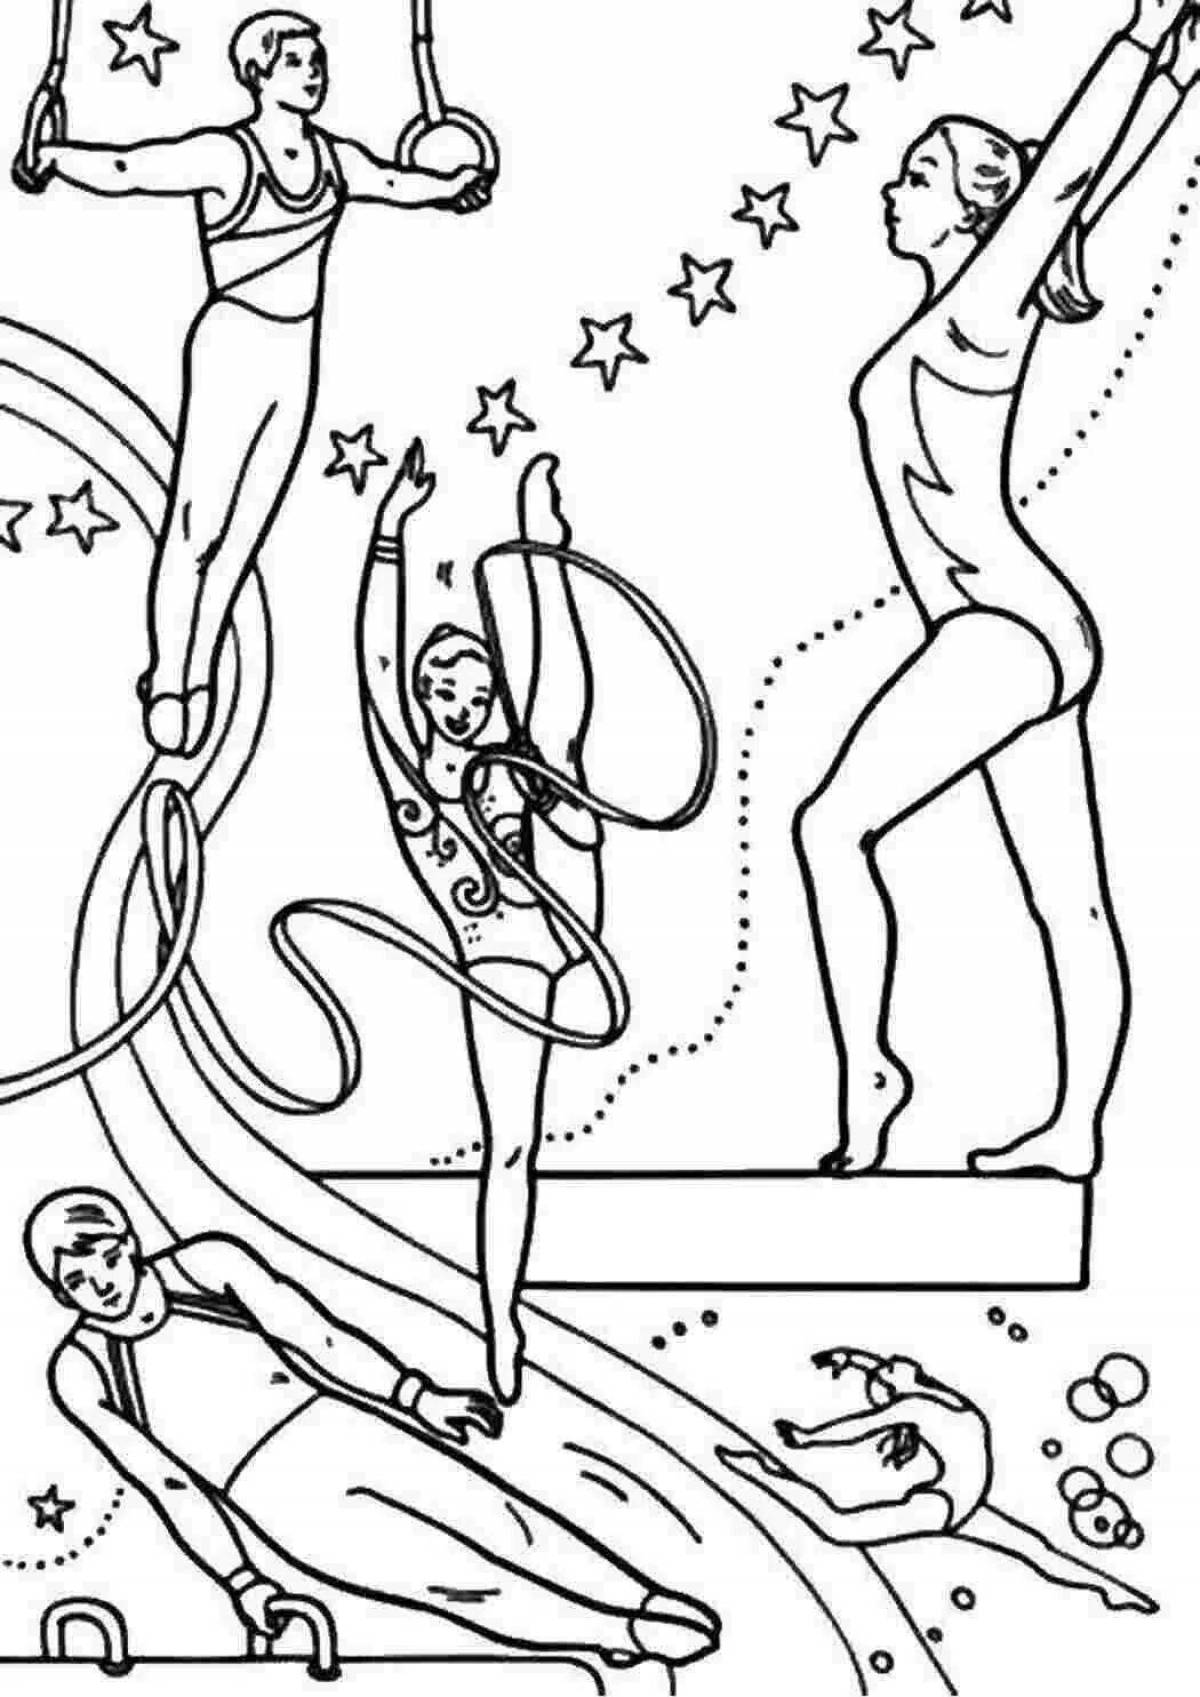 Glitter gymnast coloring pages for kids